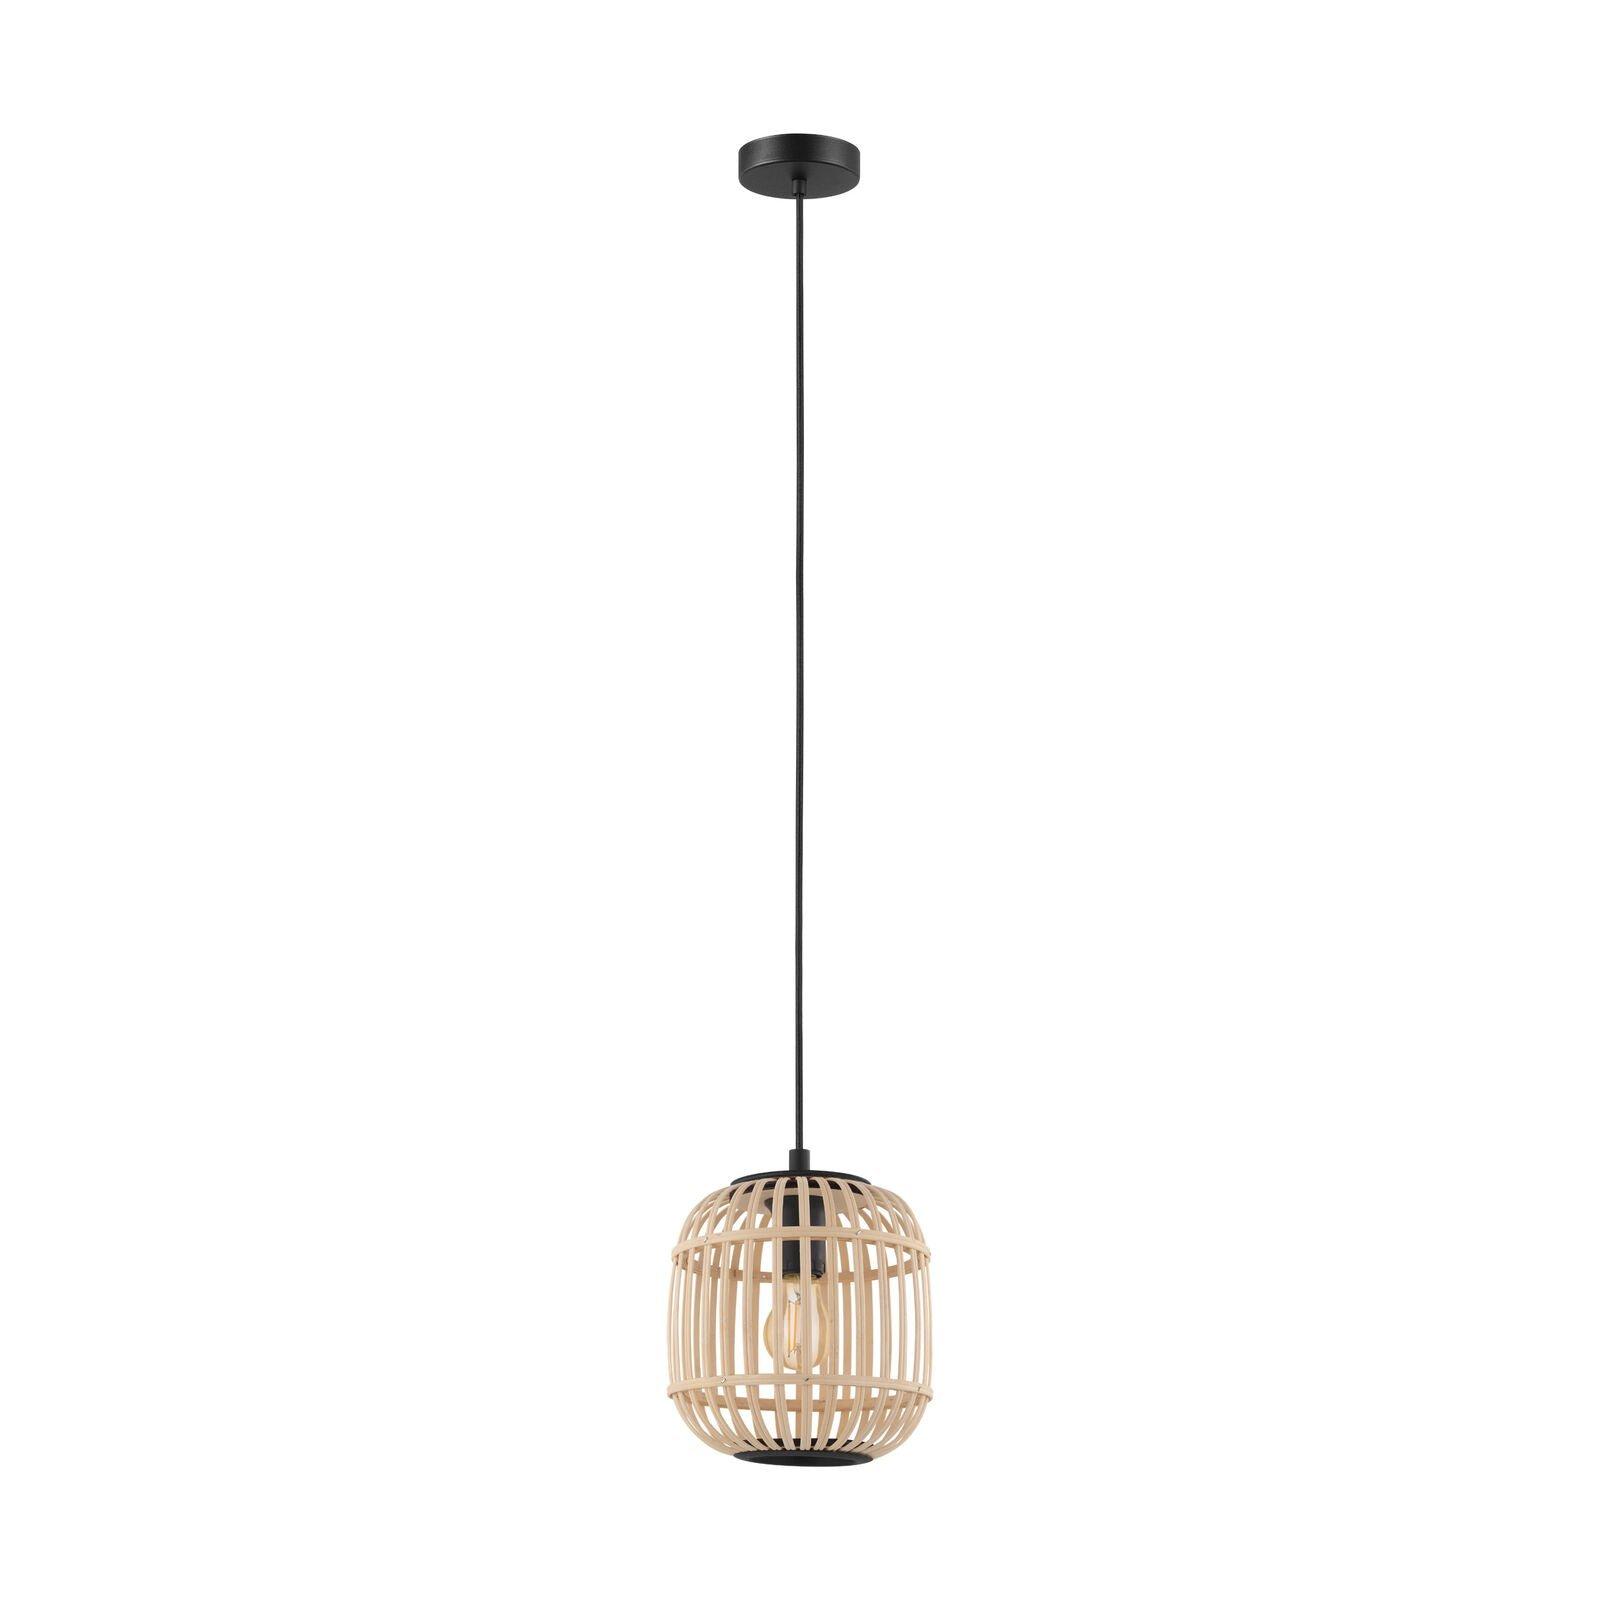 Hanging Ceiling Pendant Light Black & Wicker Cage 1x 28W E27 Feature Lamp